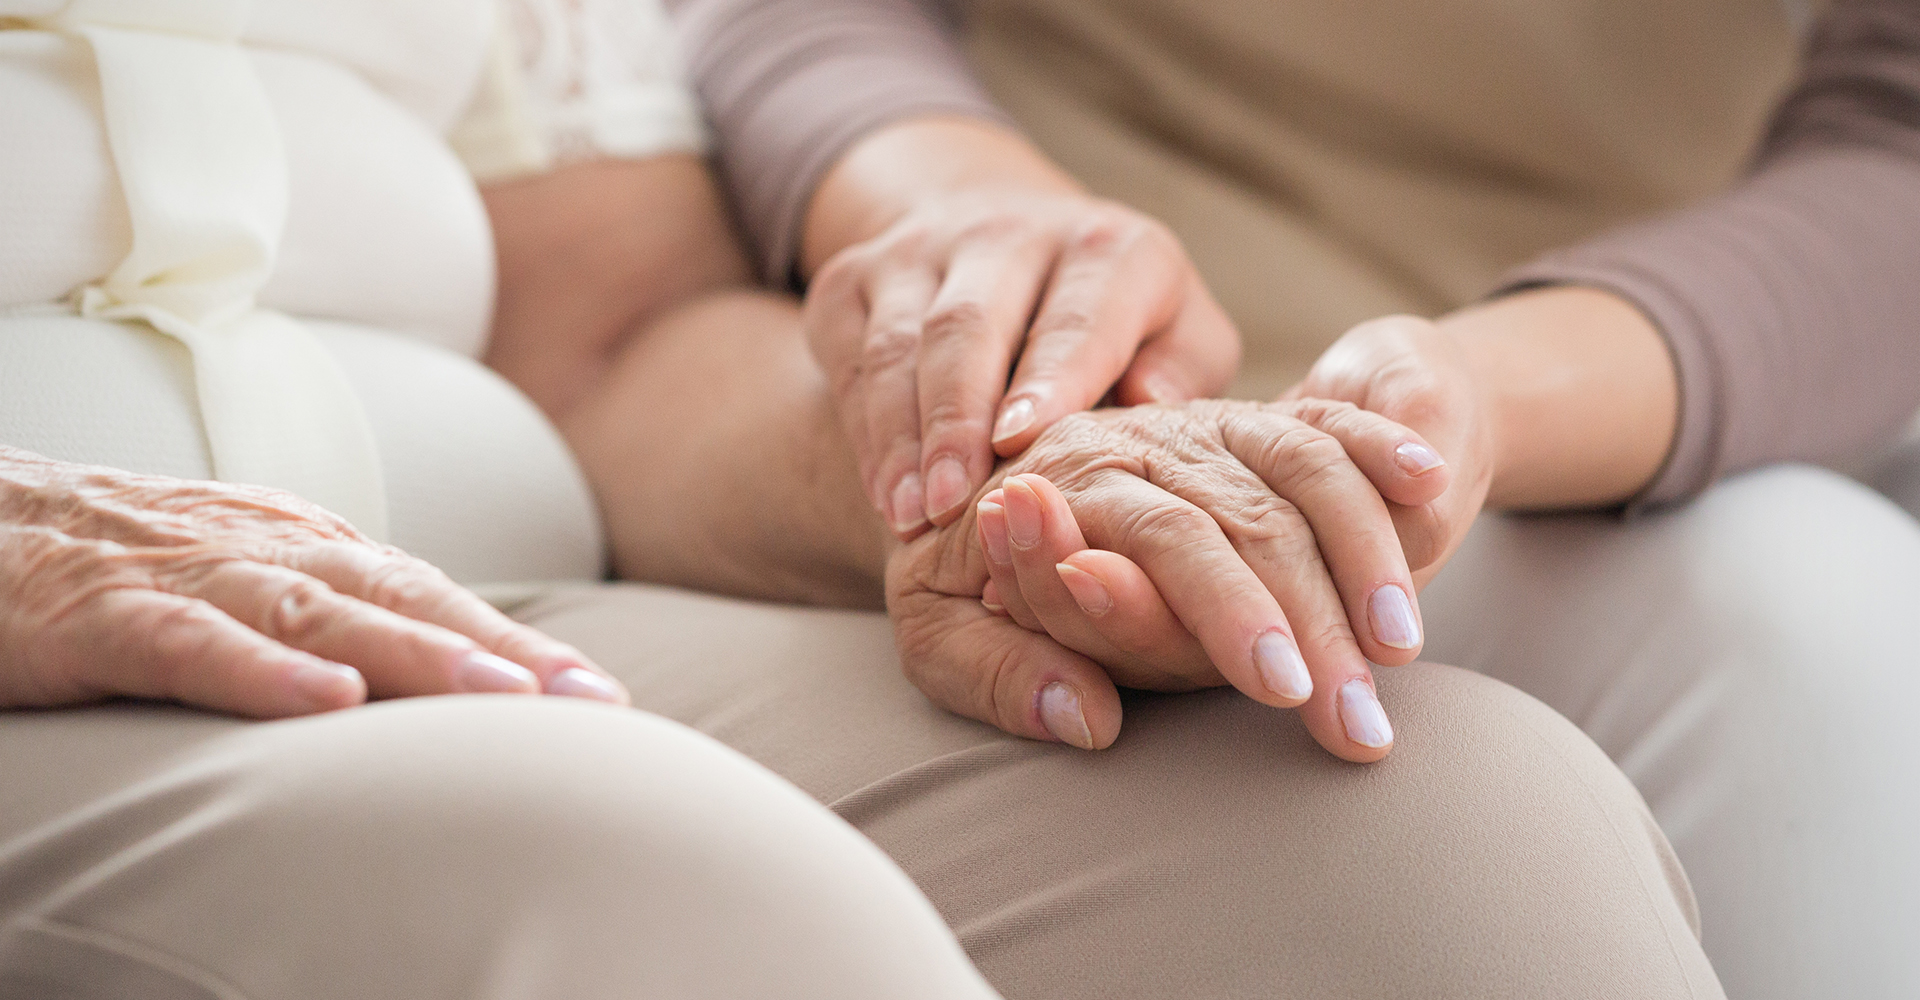 A woman holding hands with an elderly woman